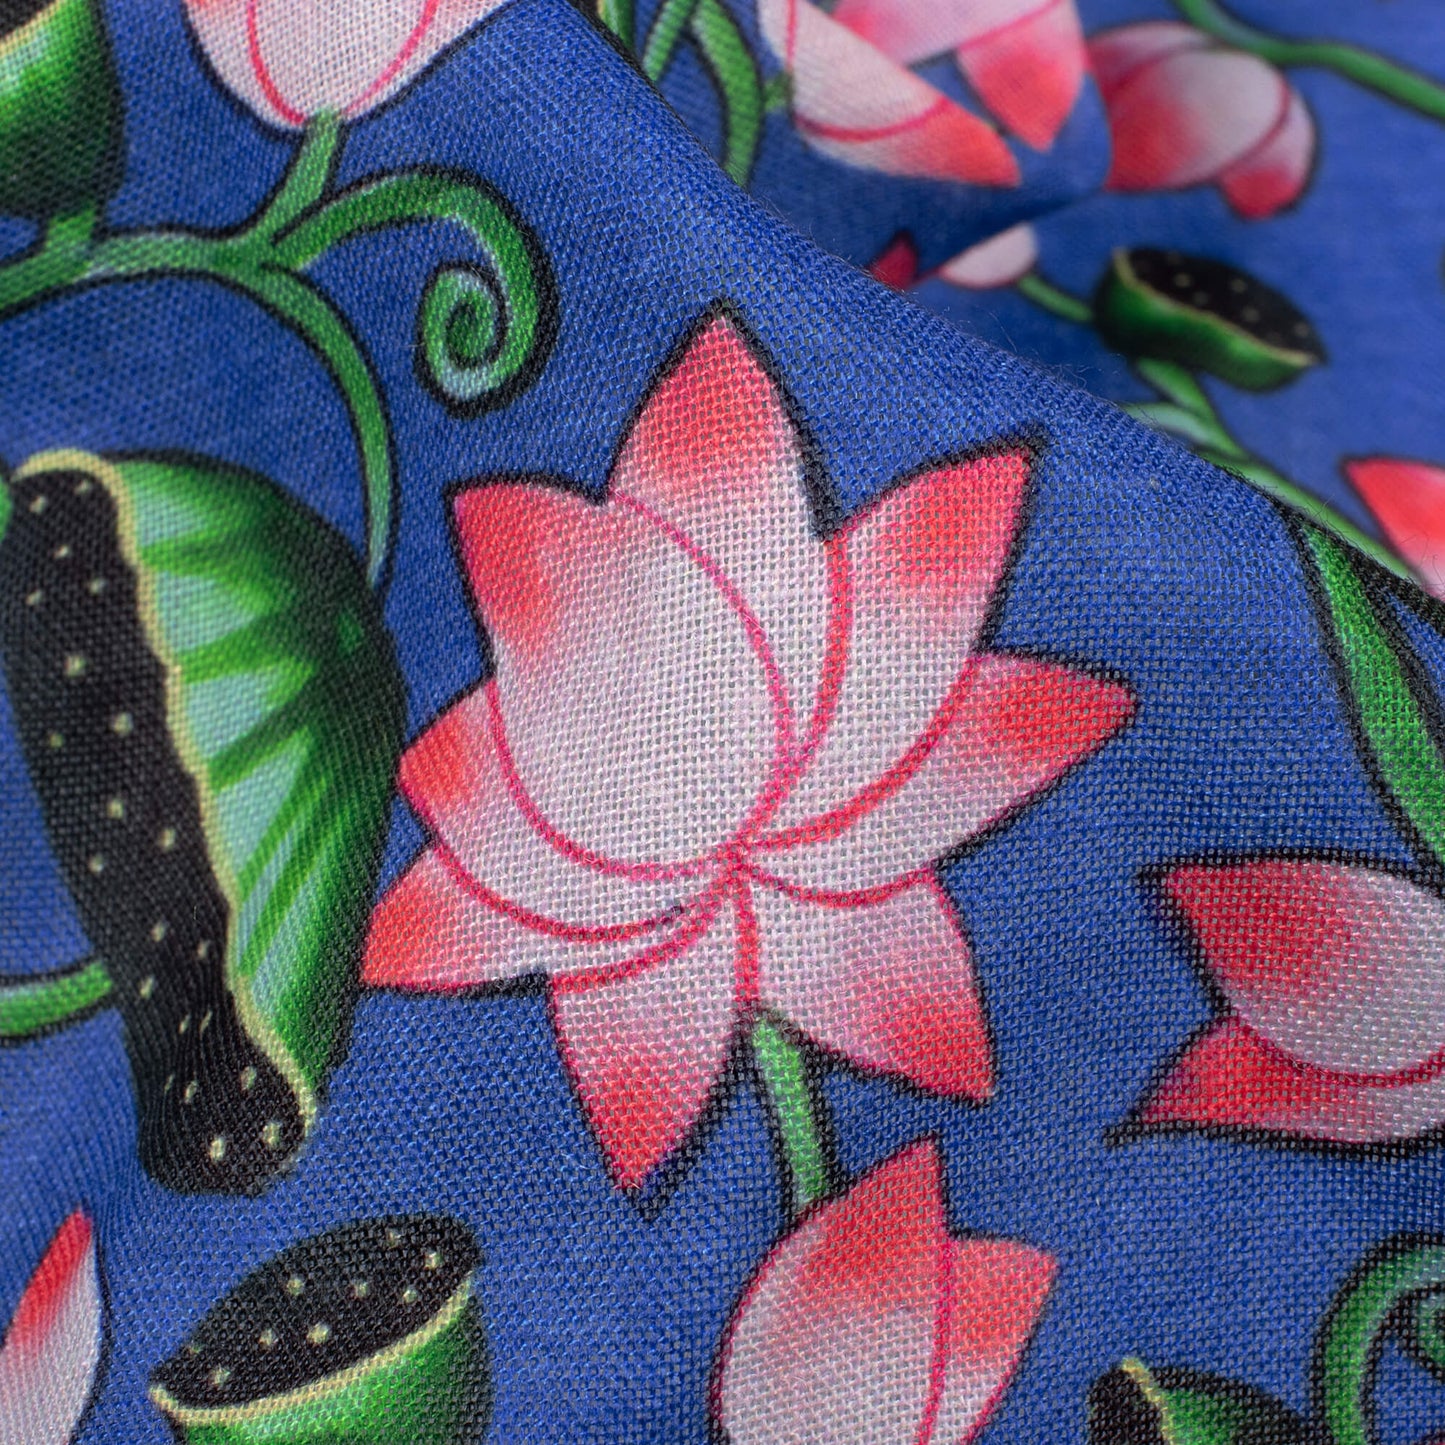 Cerulean Blue And Taffy Pink Pichwaii Pattern Digital Print Poly Cambric Fabric